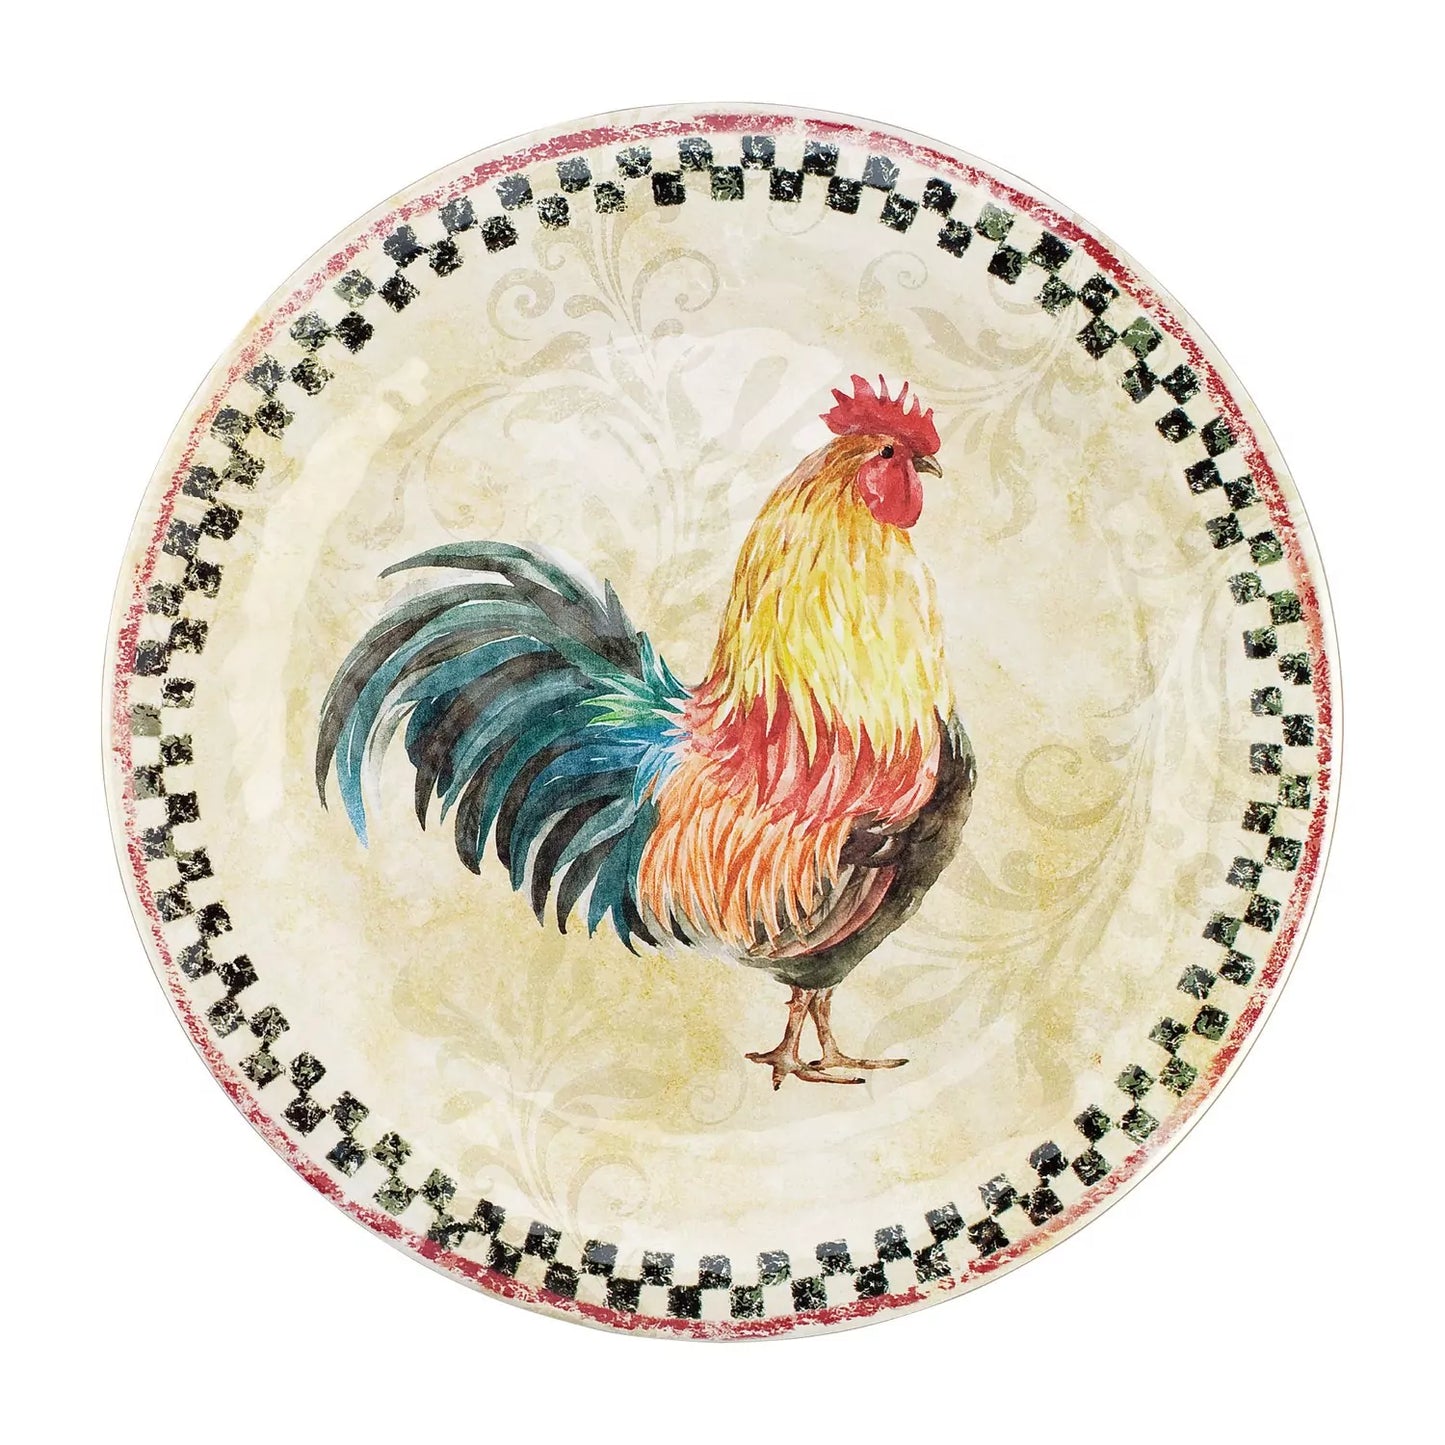 Country Rooster Melamine 11″ Plate, Sold As A Set Of 6